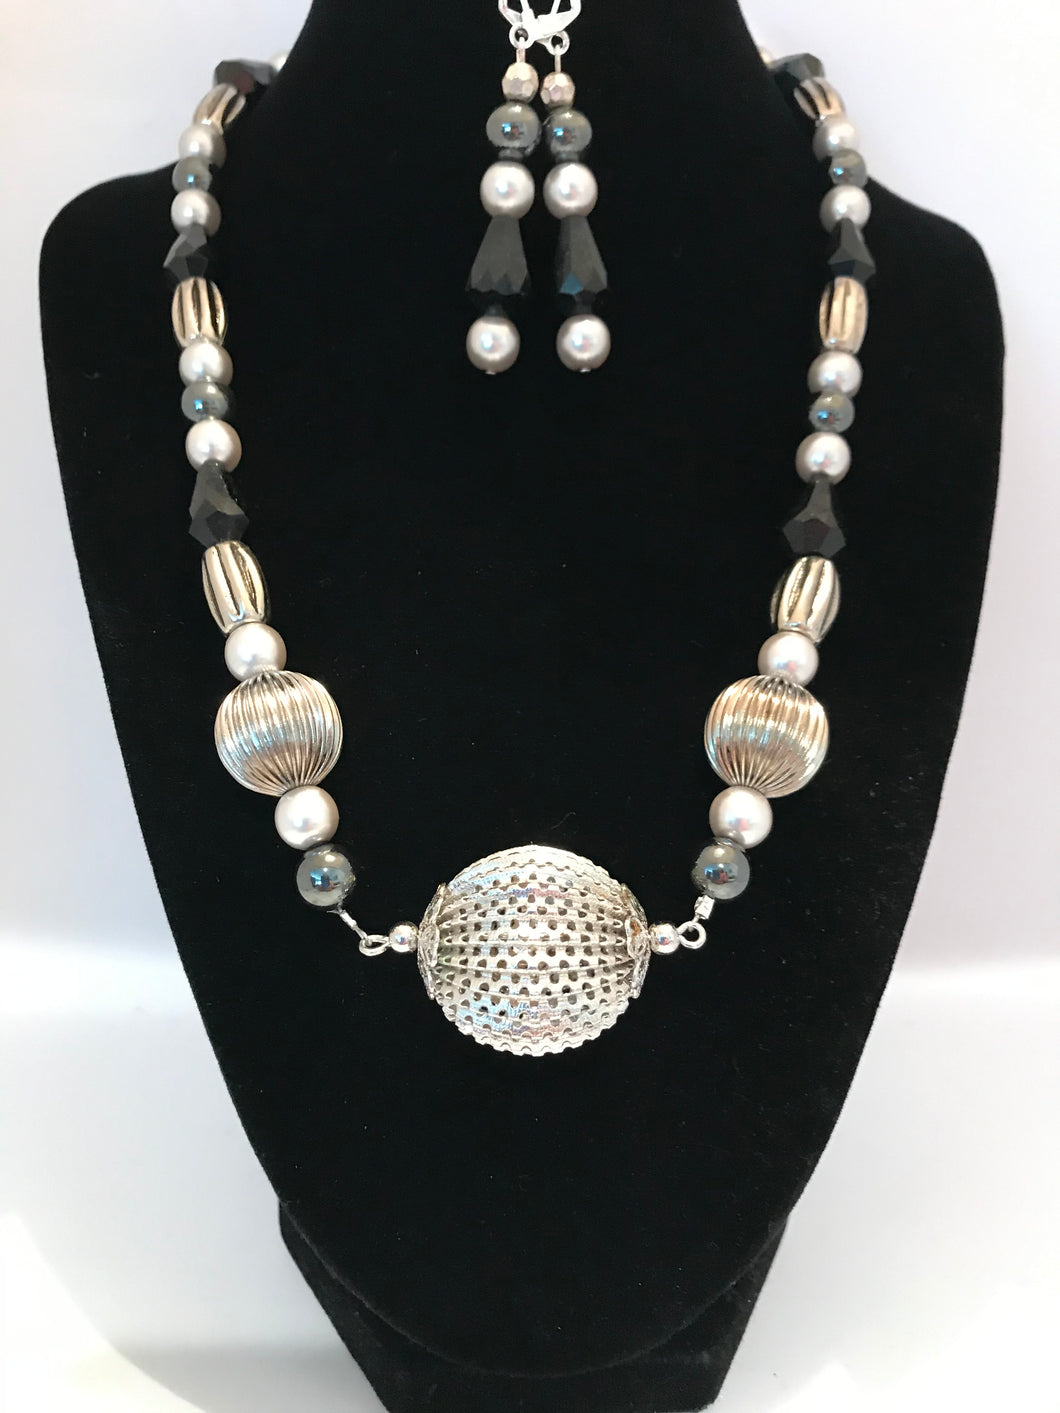 Metal oblong focal pendant with assorted metal, pearl and glass beads, with matching earrings.